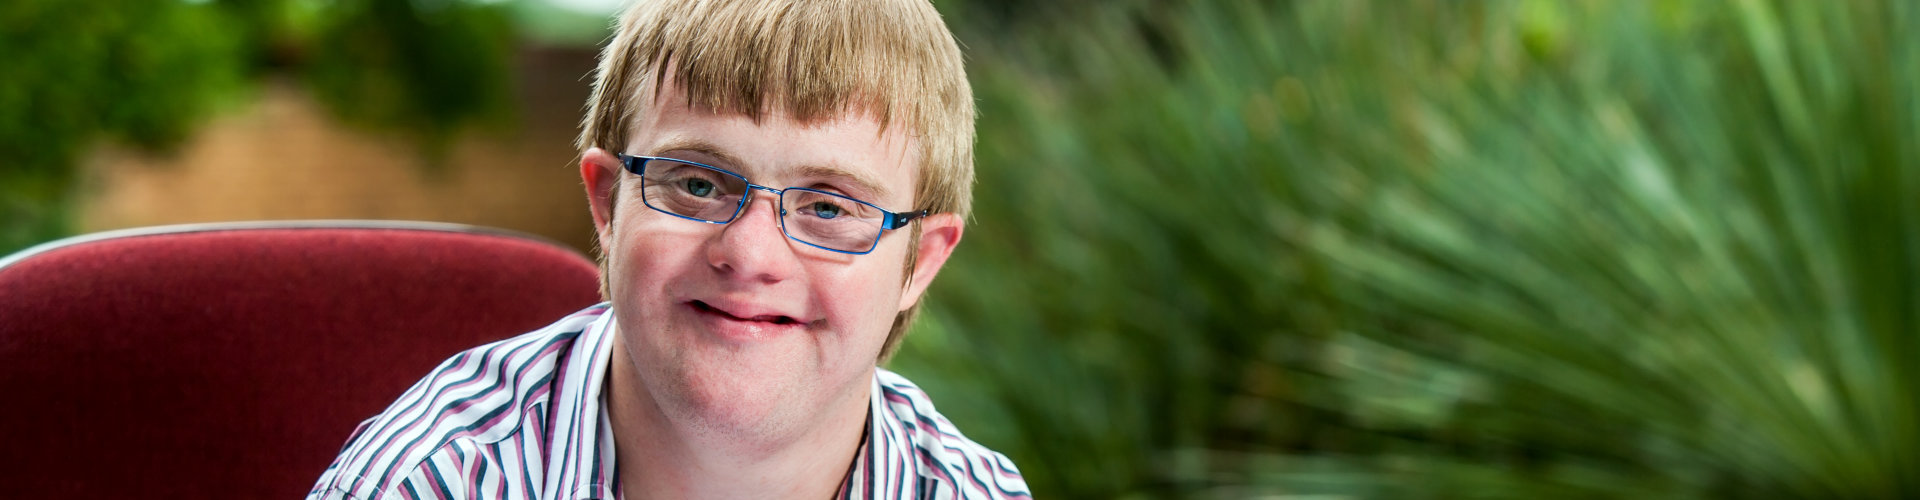 smiling boy with down syndrome